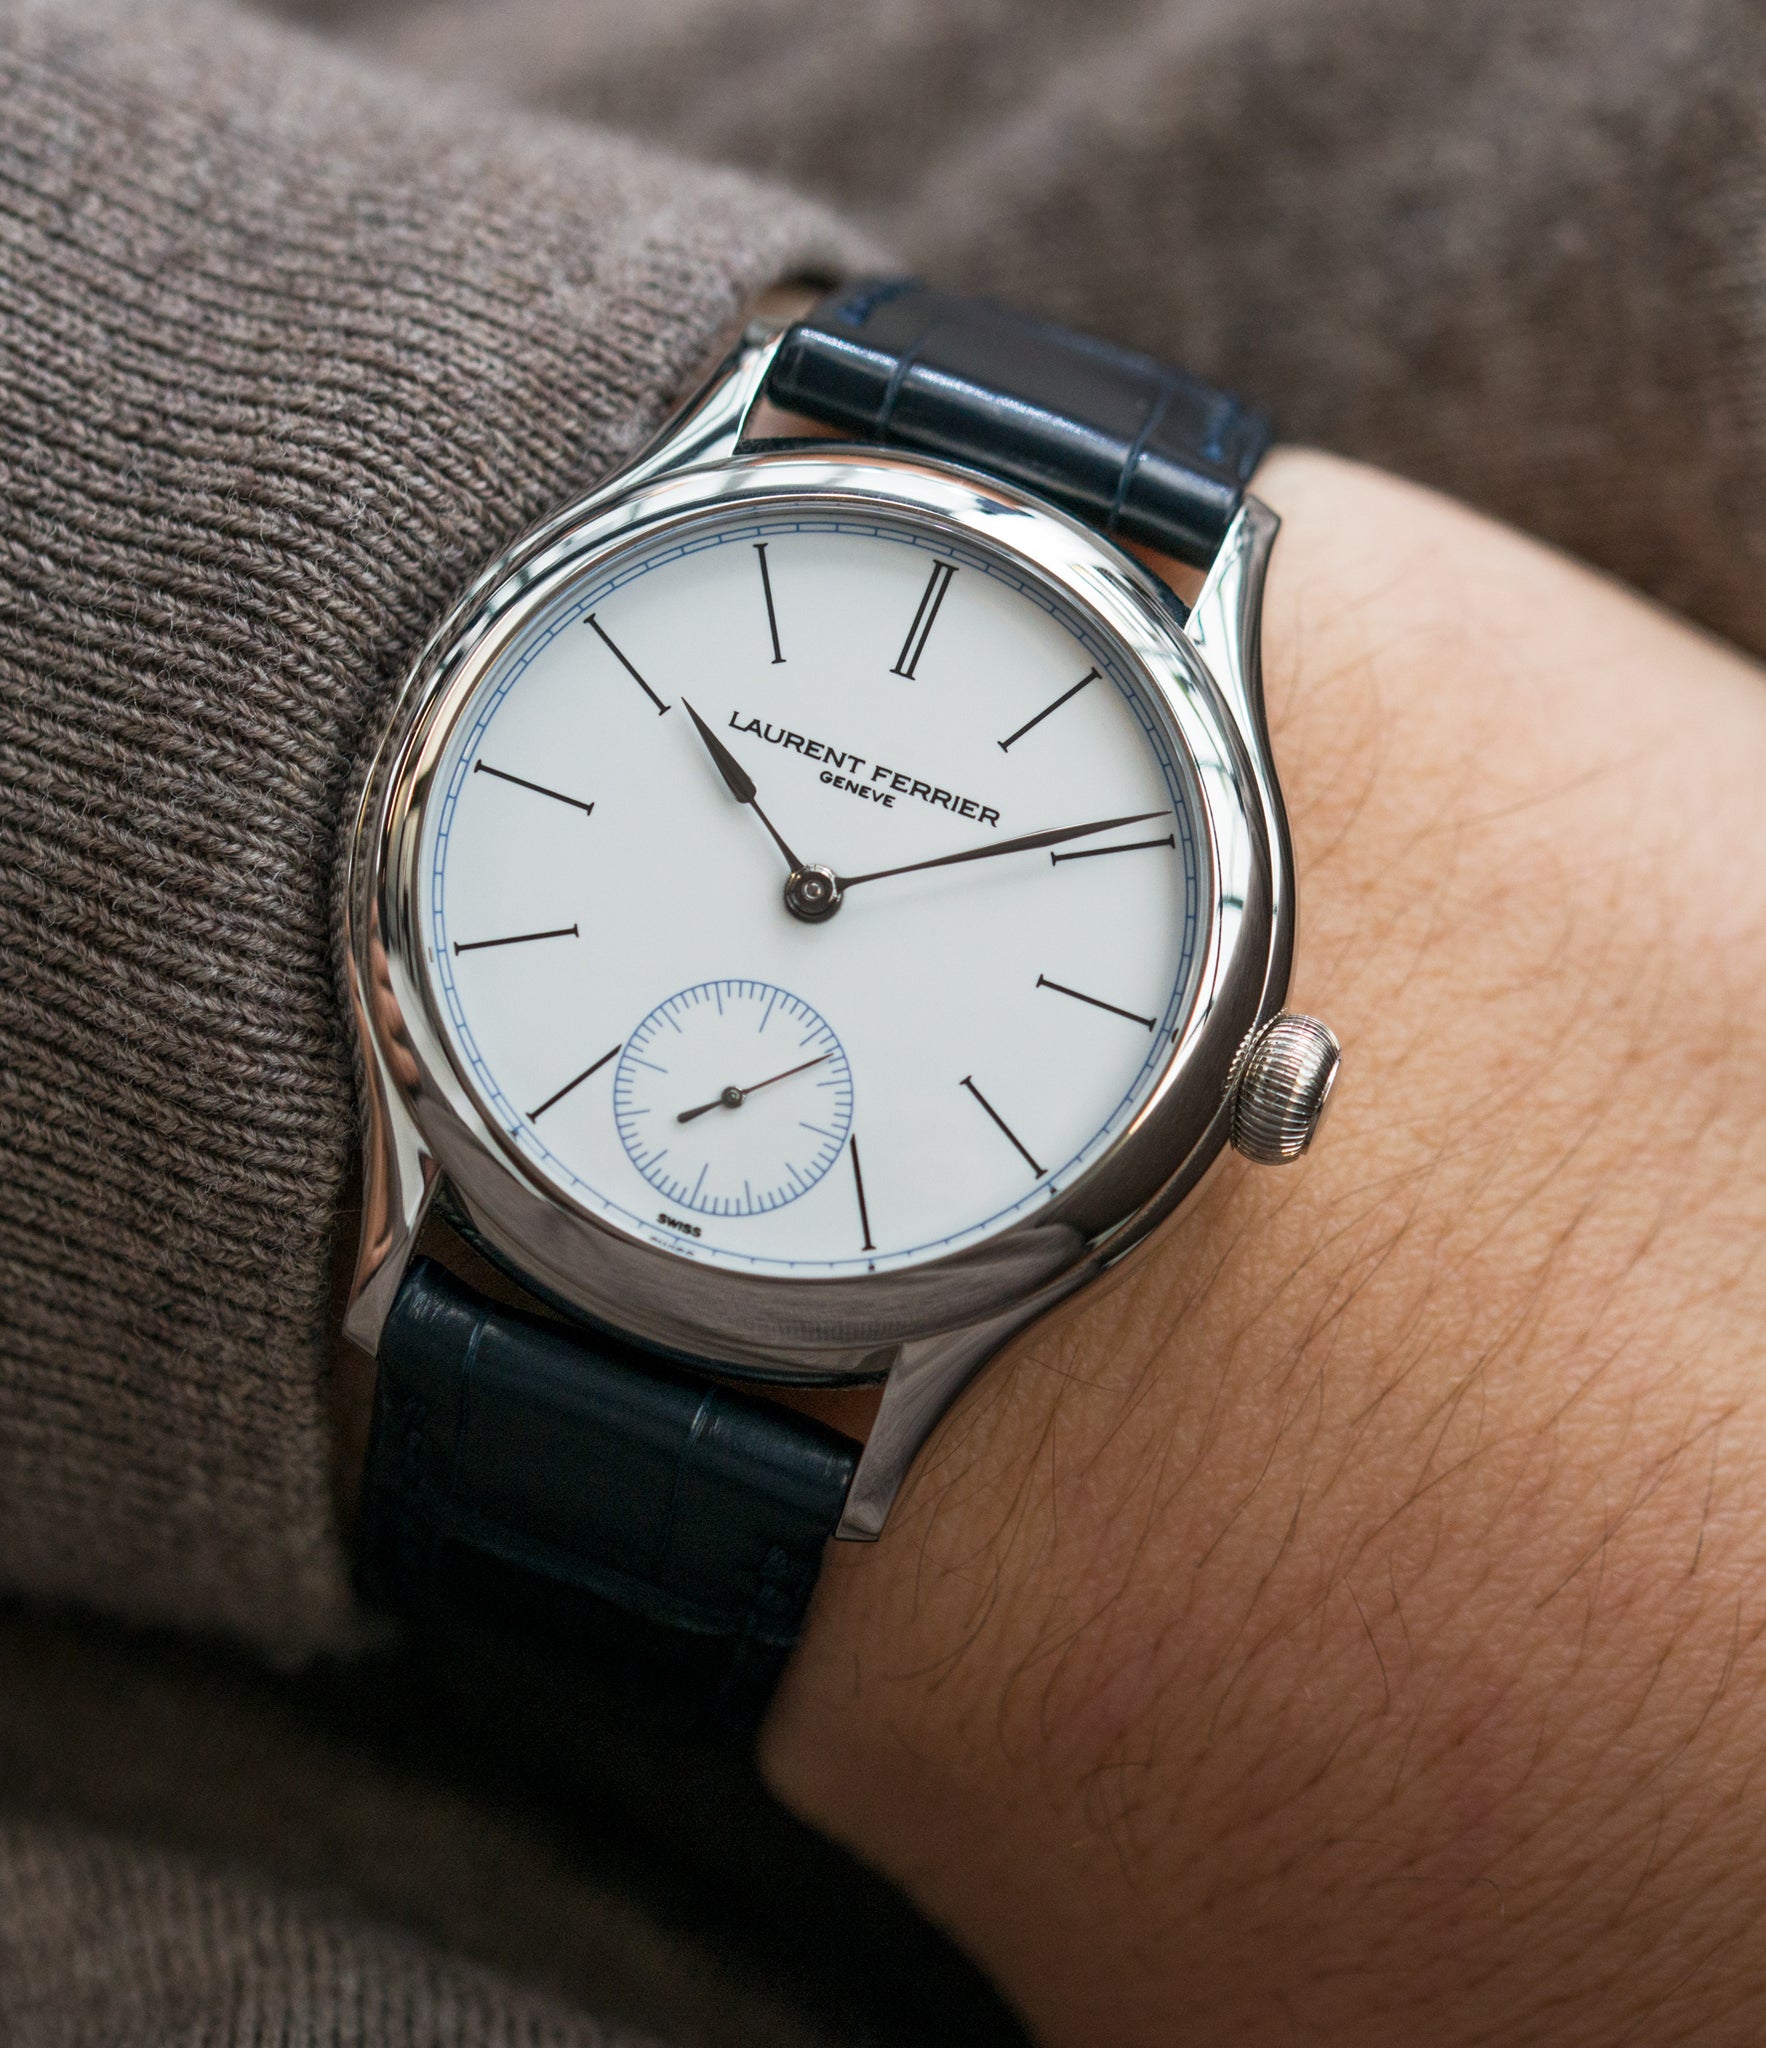 on the wrist Laurent Ferrier Galet Micro-Rotor FBN 230.02 Enamel dial steel watch for sale online at A Collected Man London UK approved seller of independent watchmaker Laurent Ferrier